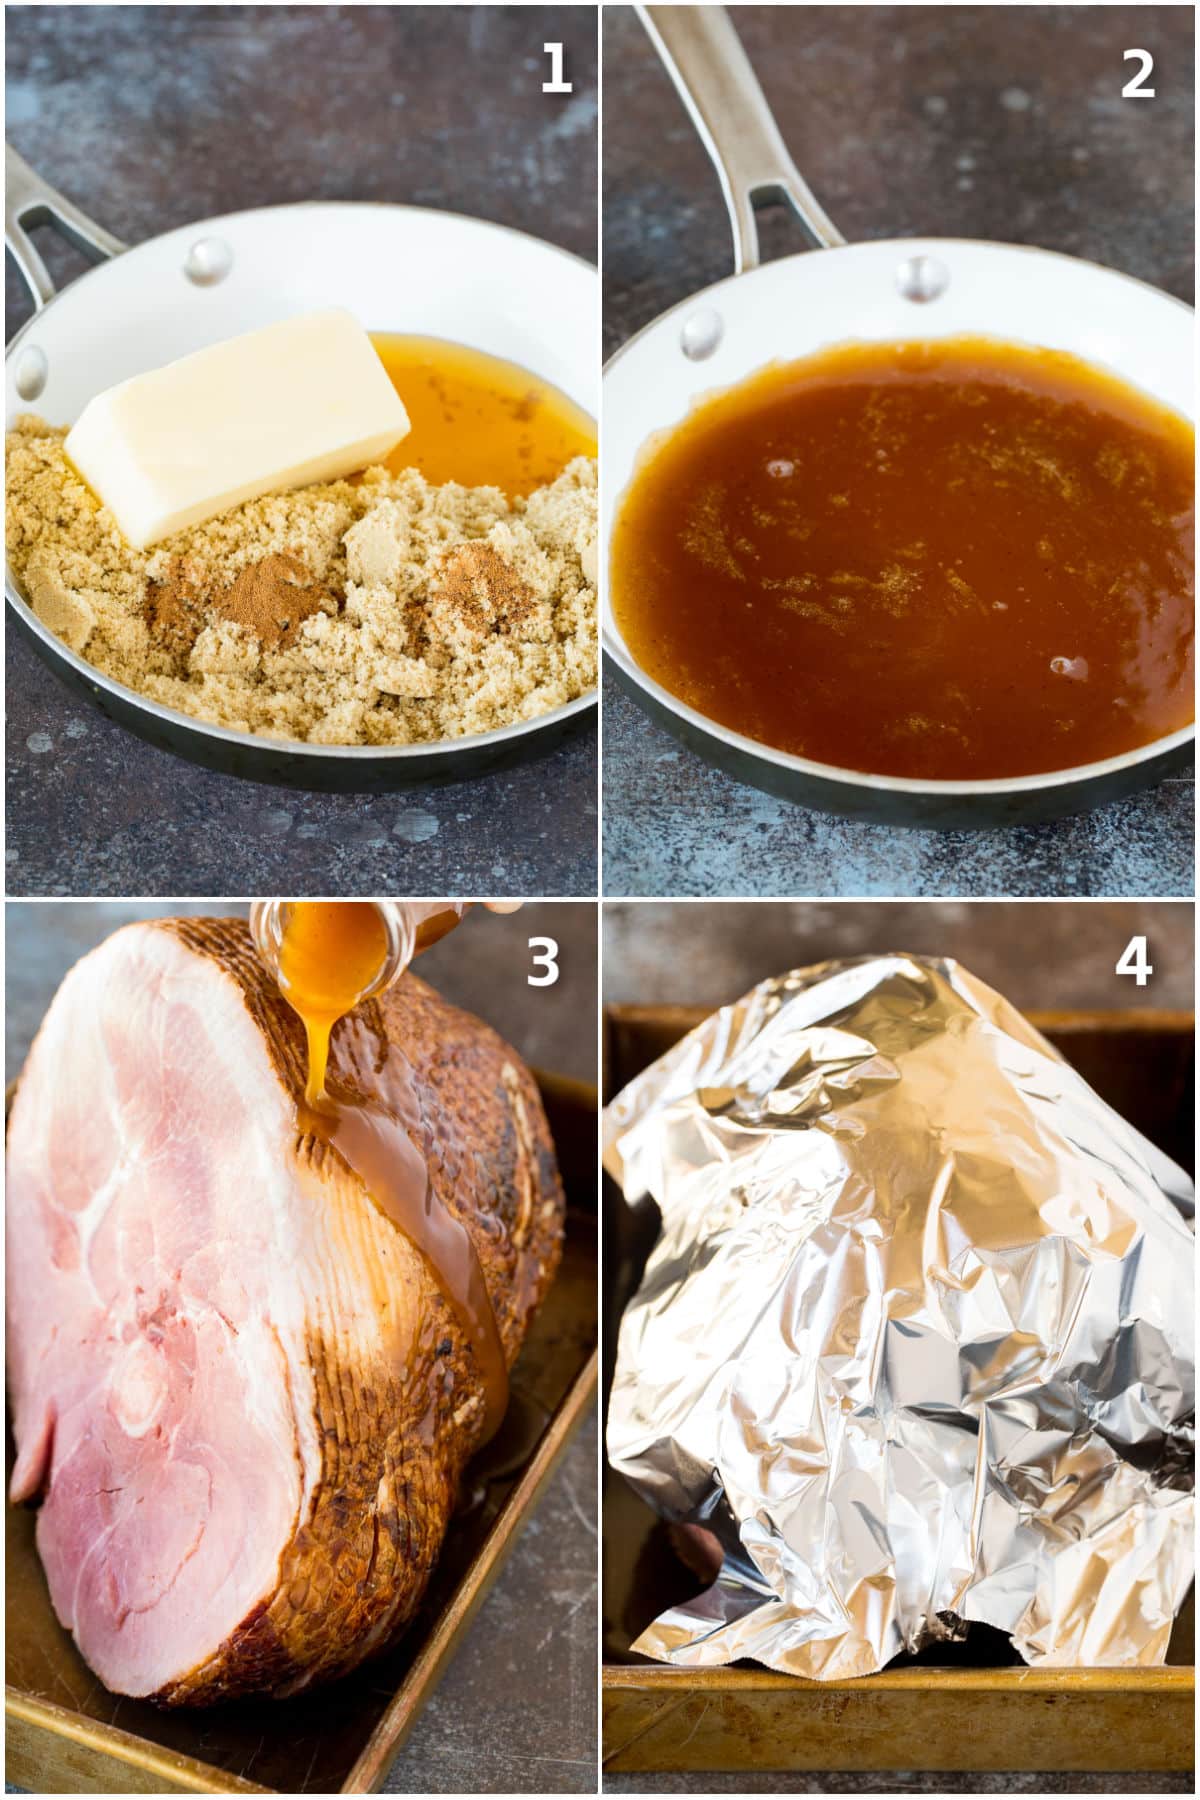 Step by step shots showing how to make ham glaze and cook spiral cut ham.